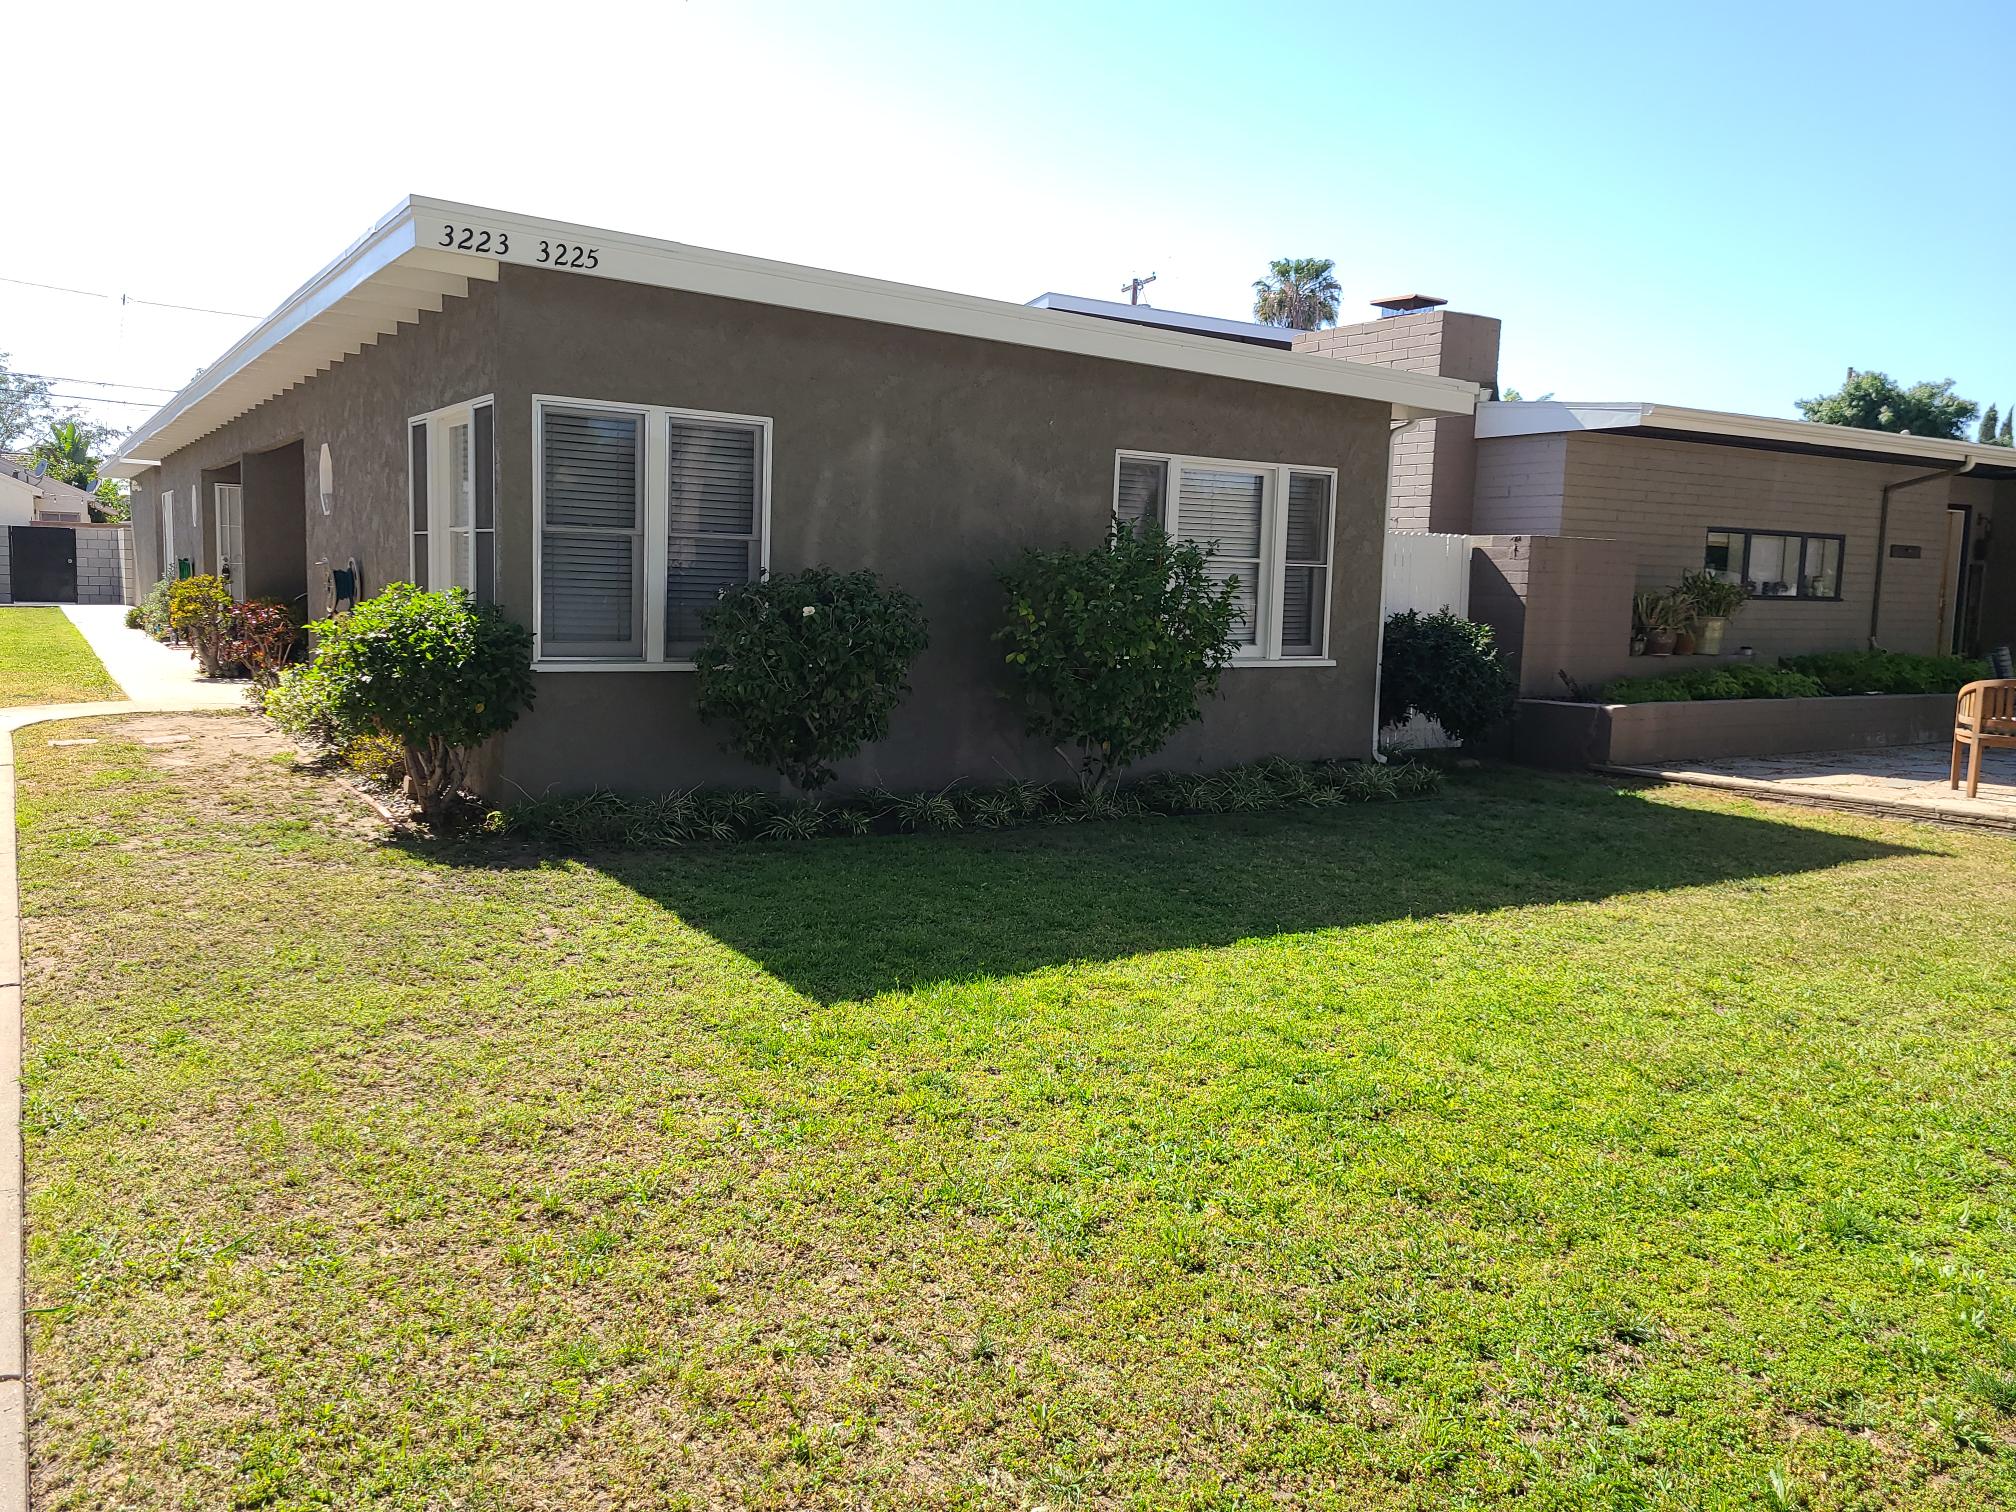 Property Listing For 05/07/2021